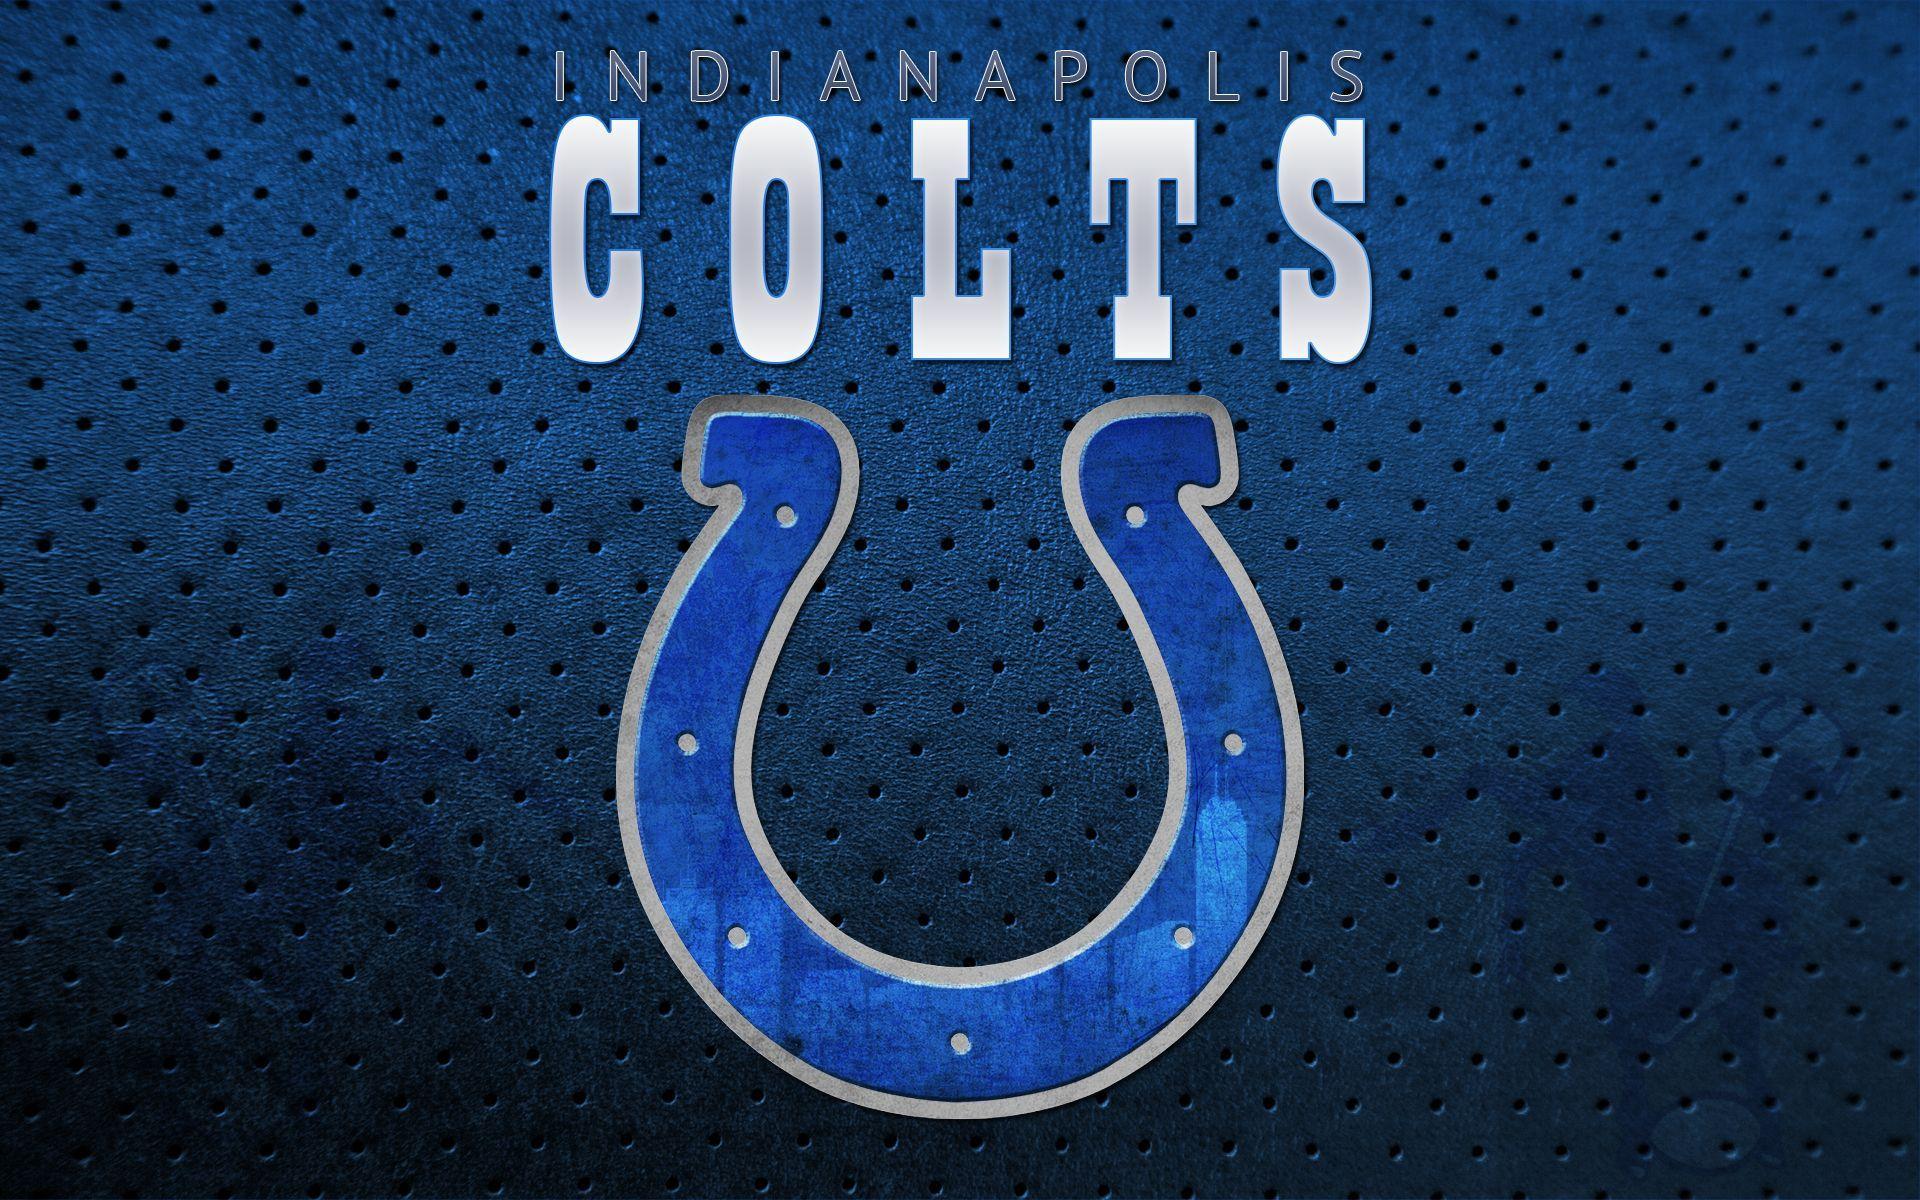 NFL Logo Indianapolis Colts wallpapers HD 2016 in Football